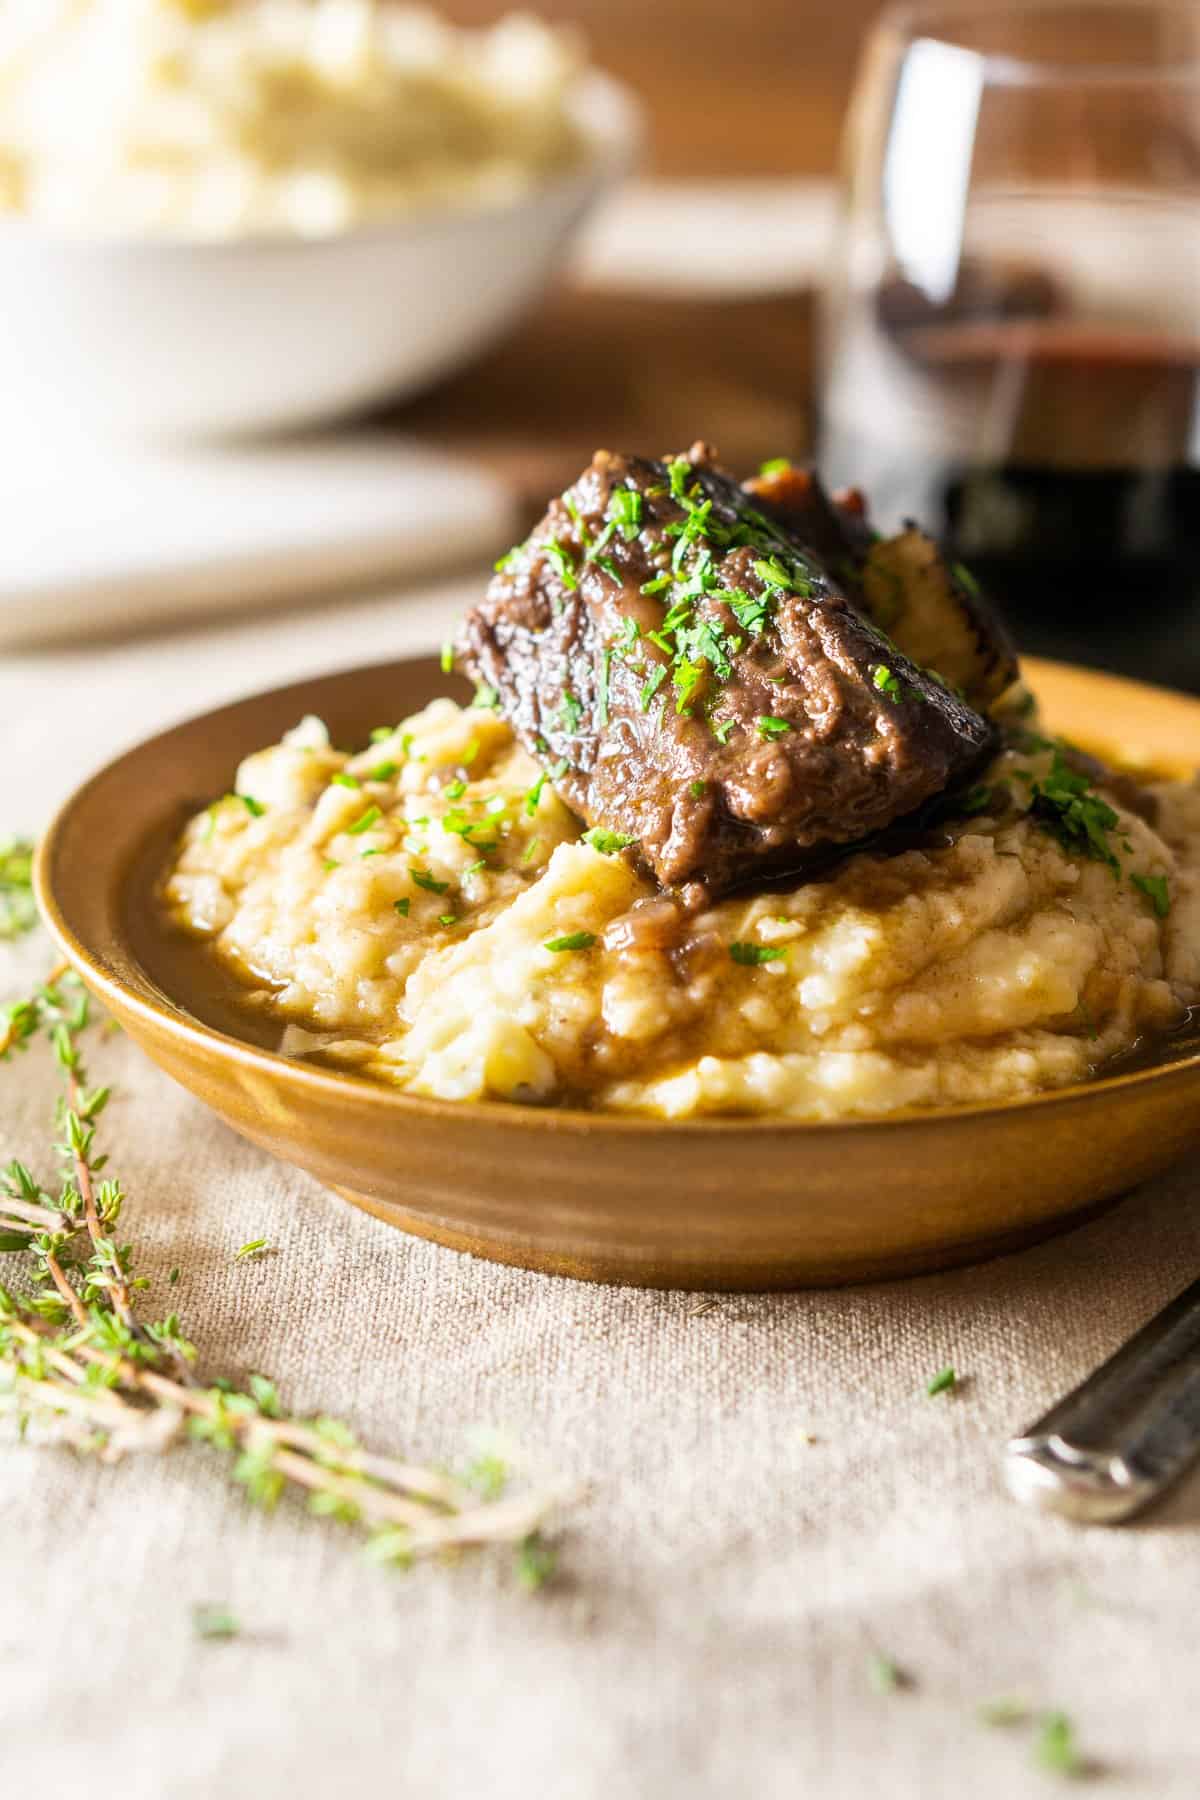  The red wine-braised short ribs on brown butter mashed potatoes.